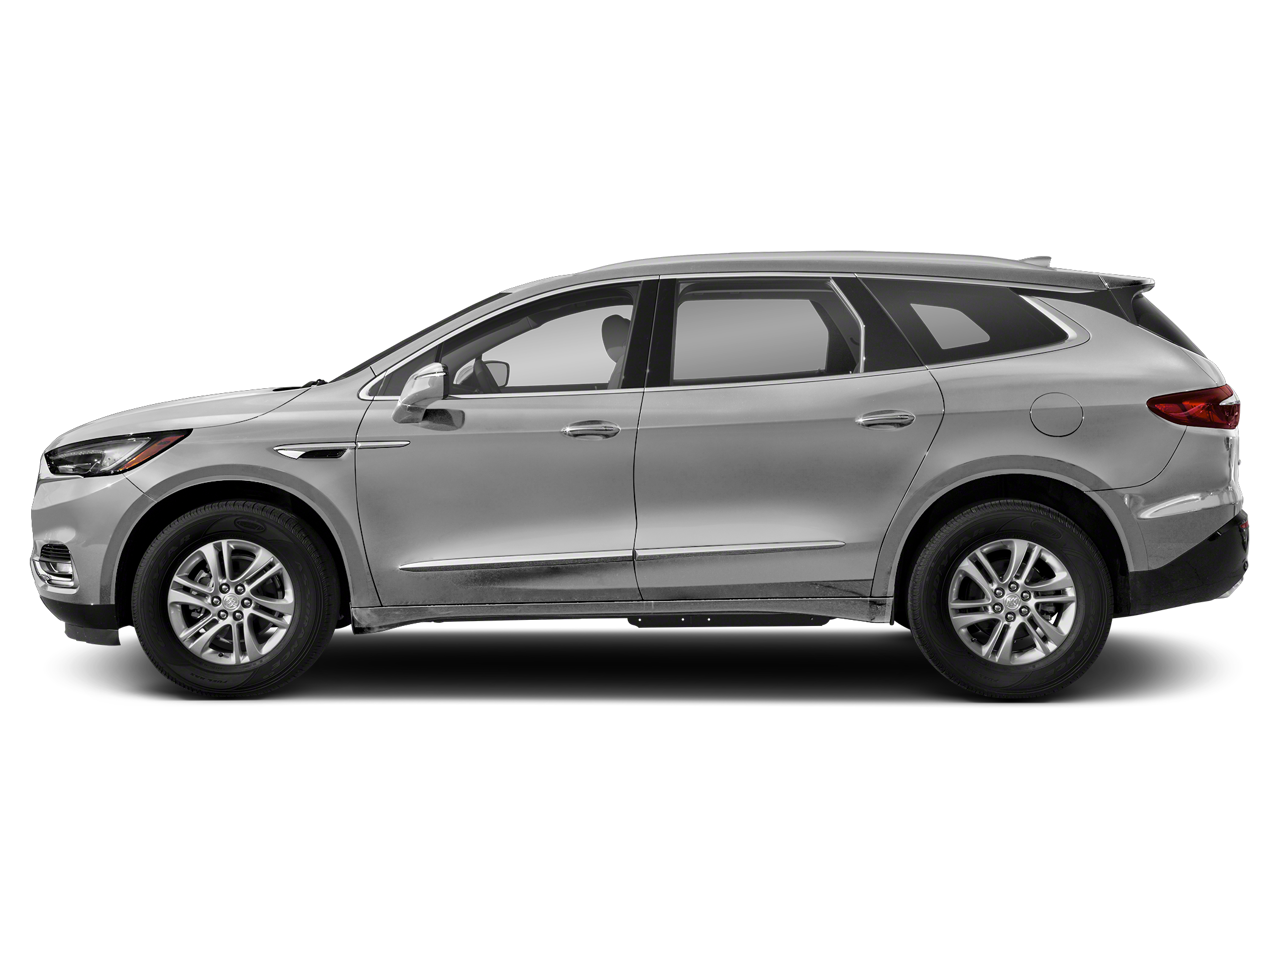 2021 Buick Enclave Essence AWD + Tow